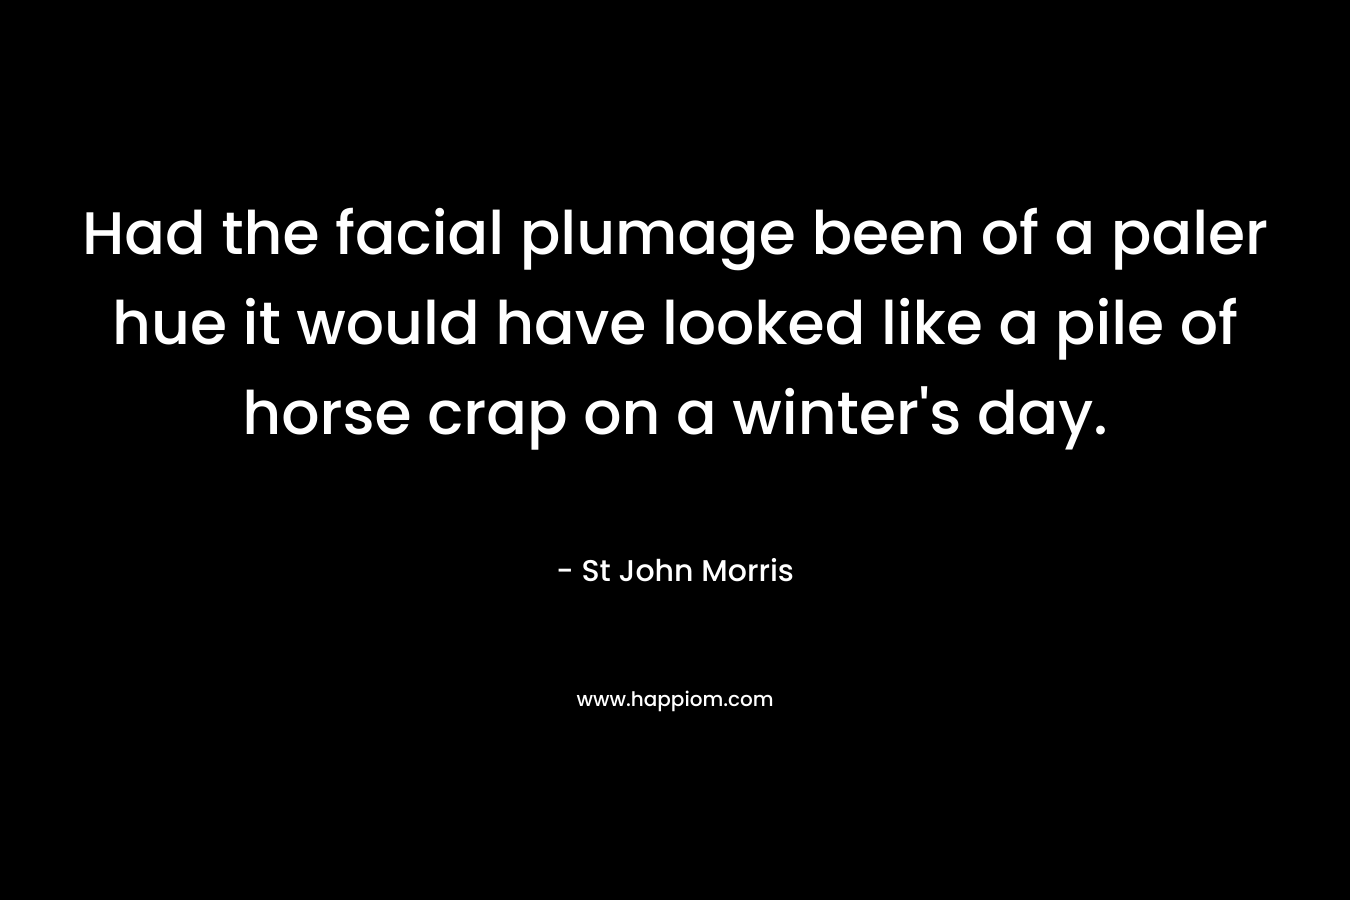 Had the facial plumage been of a paler hue it would have looked like a pile of horse crap on a winter’s day. – St John Morris